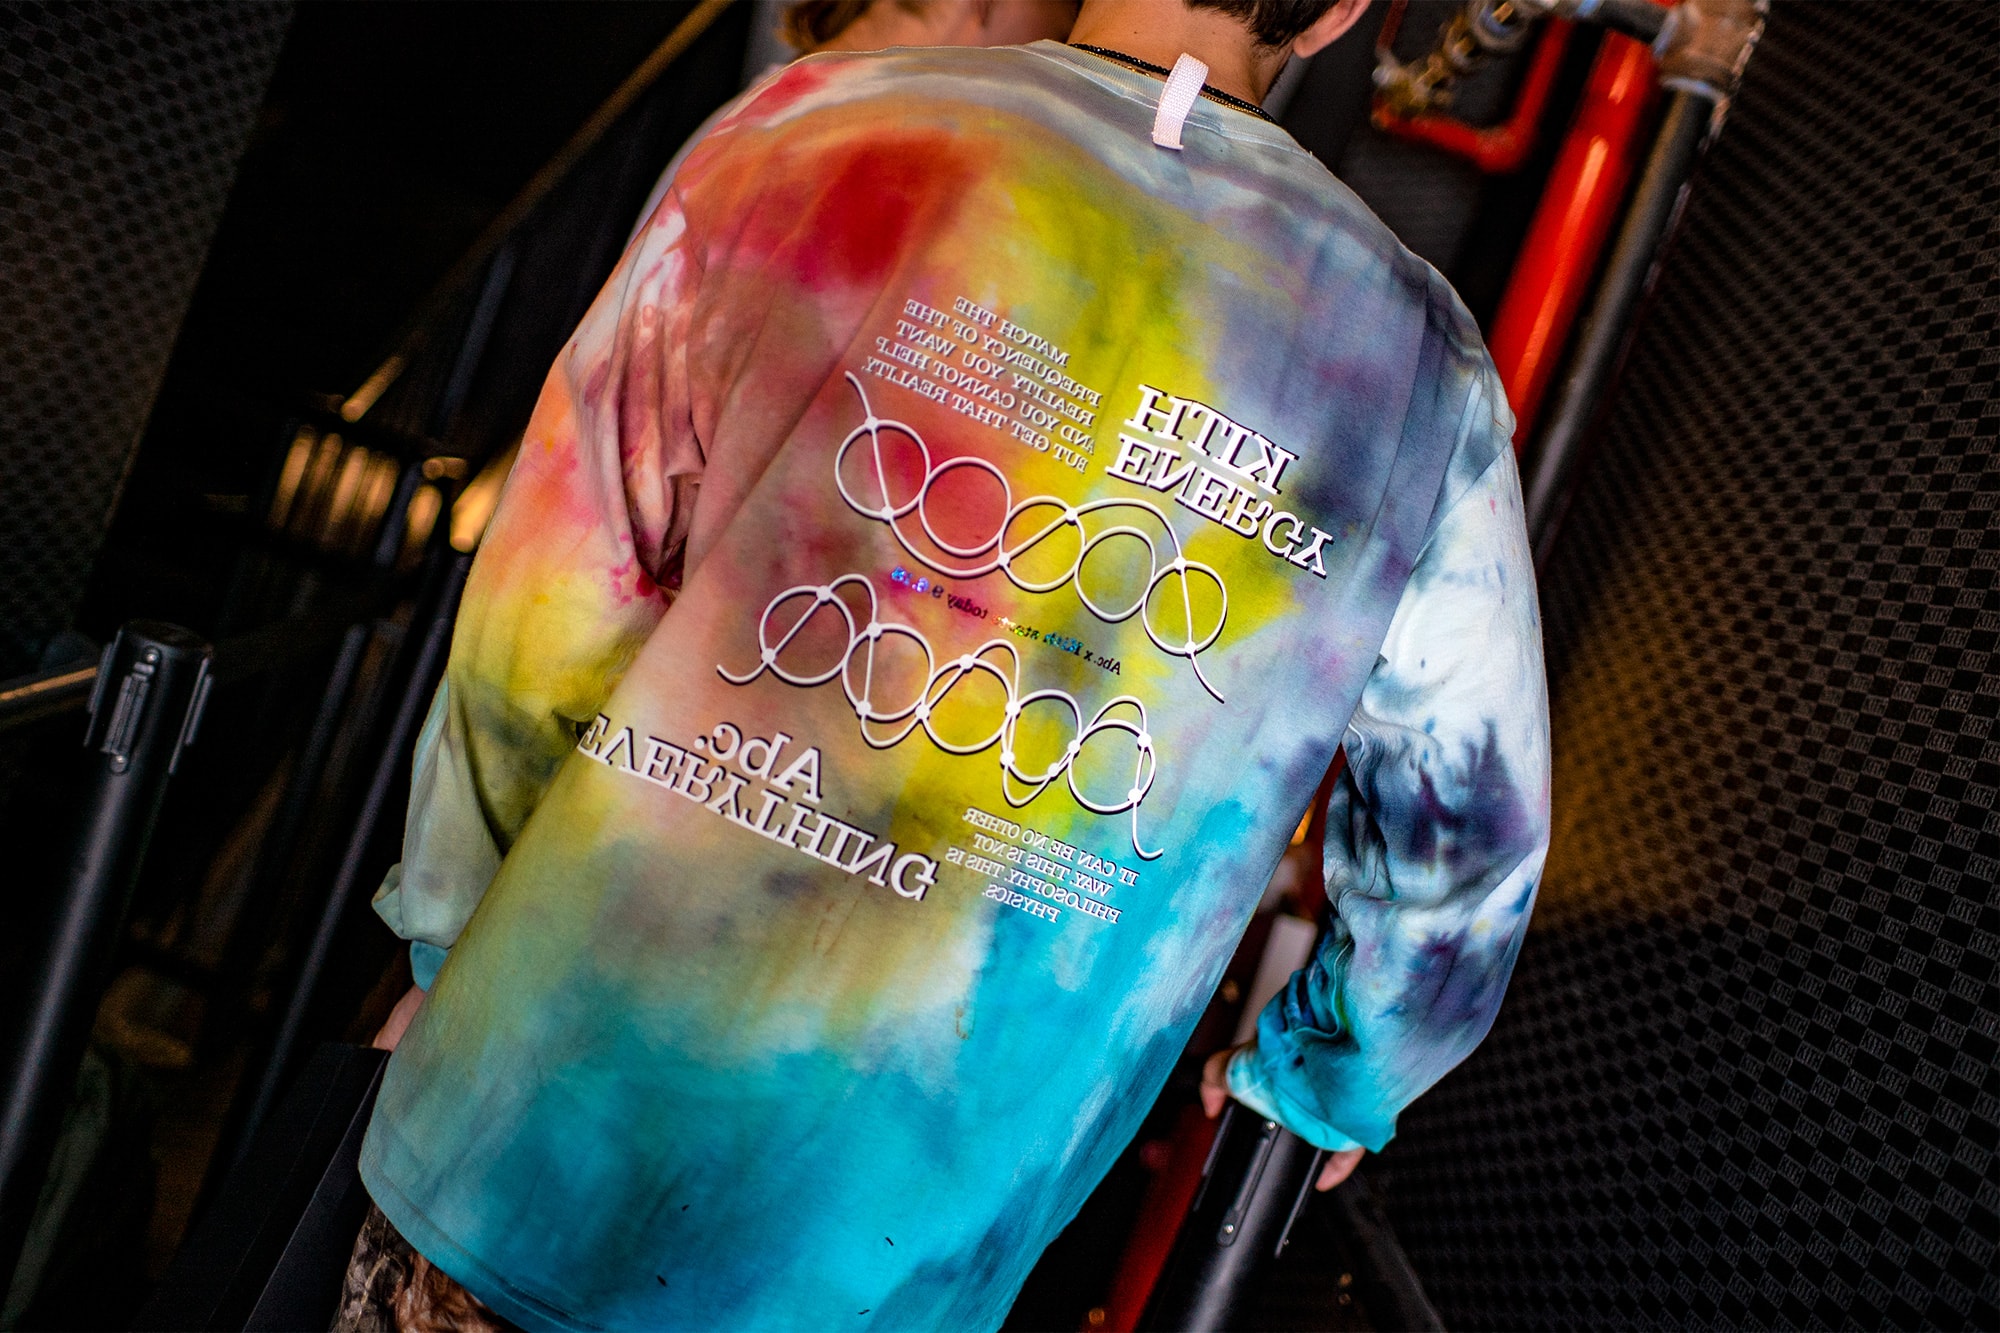 abc advisory board crystals kith energy is everything tie dye t shirt fashion 2018 september